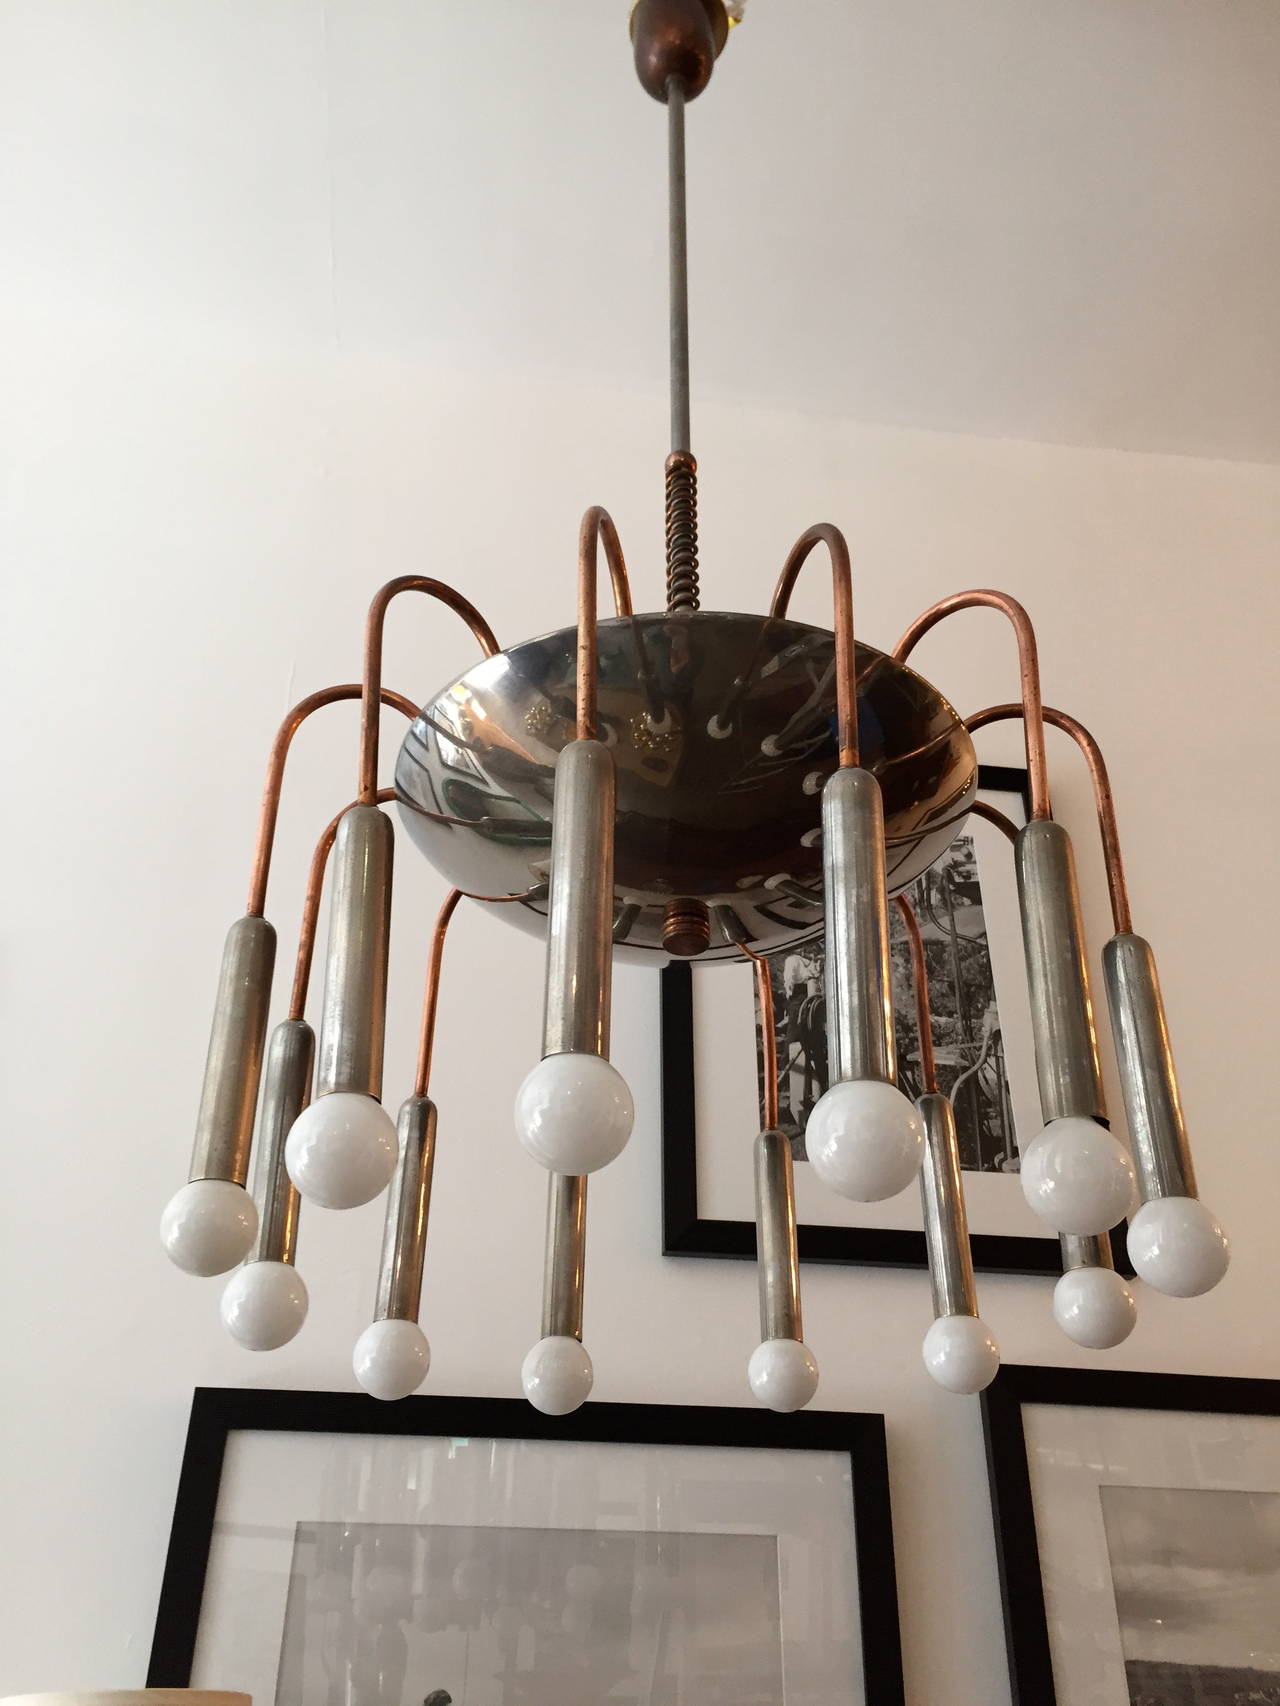 A great rare 1920s Italian Machine Age chandelier composed of an aged steel and copper fixture and decorative elements. 12 downward and three upward light sources. Great aged patina. Rewired.